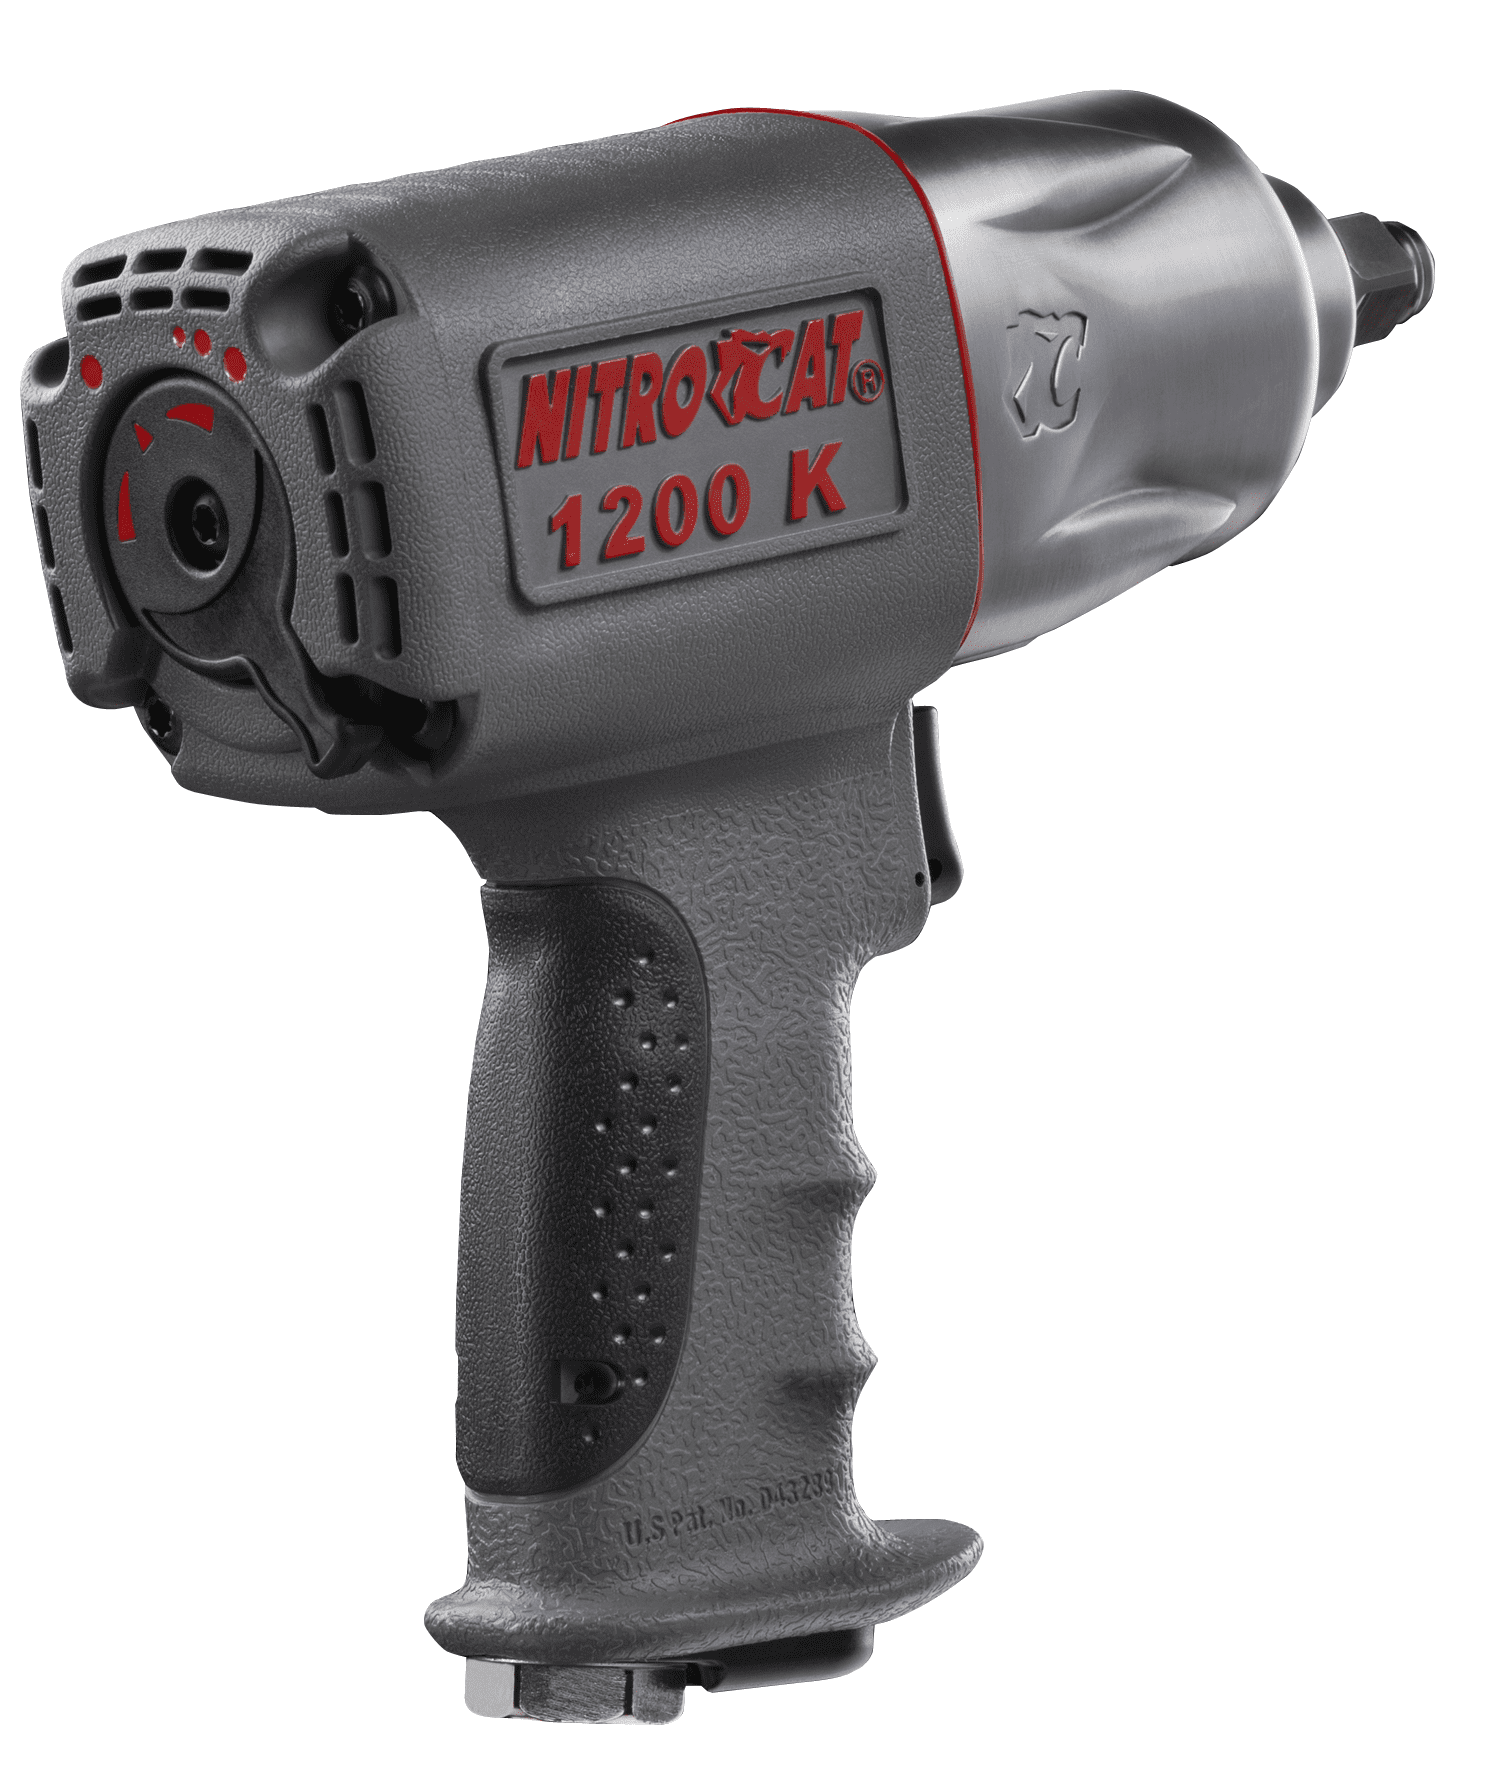 NITROCAT 1200-K 1/2-Inch Kevlar Composite Air Impact Wrench with Twin Clutch Mechanism